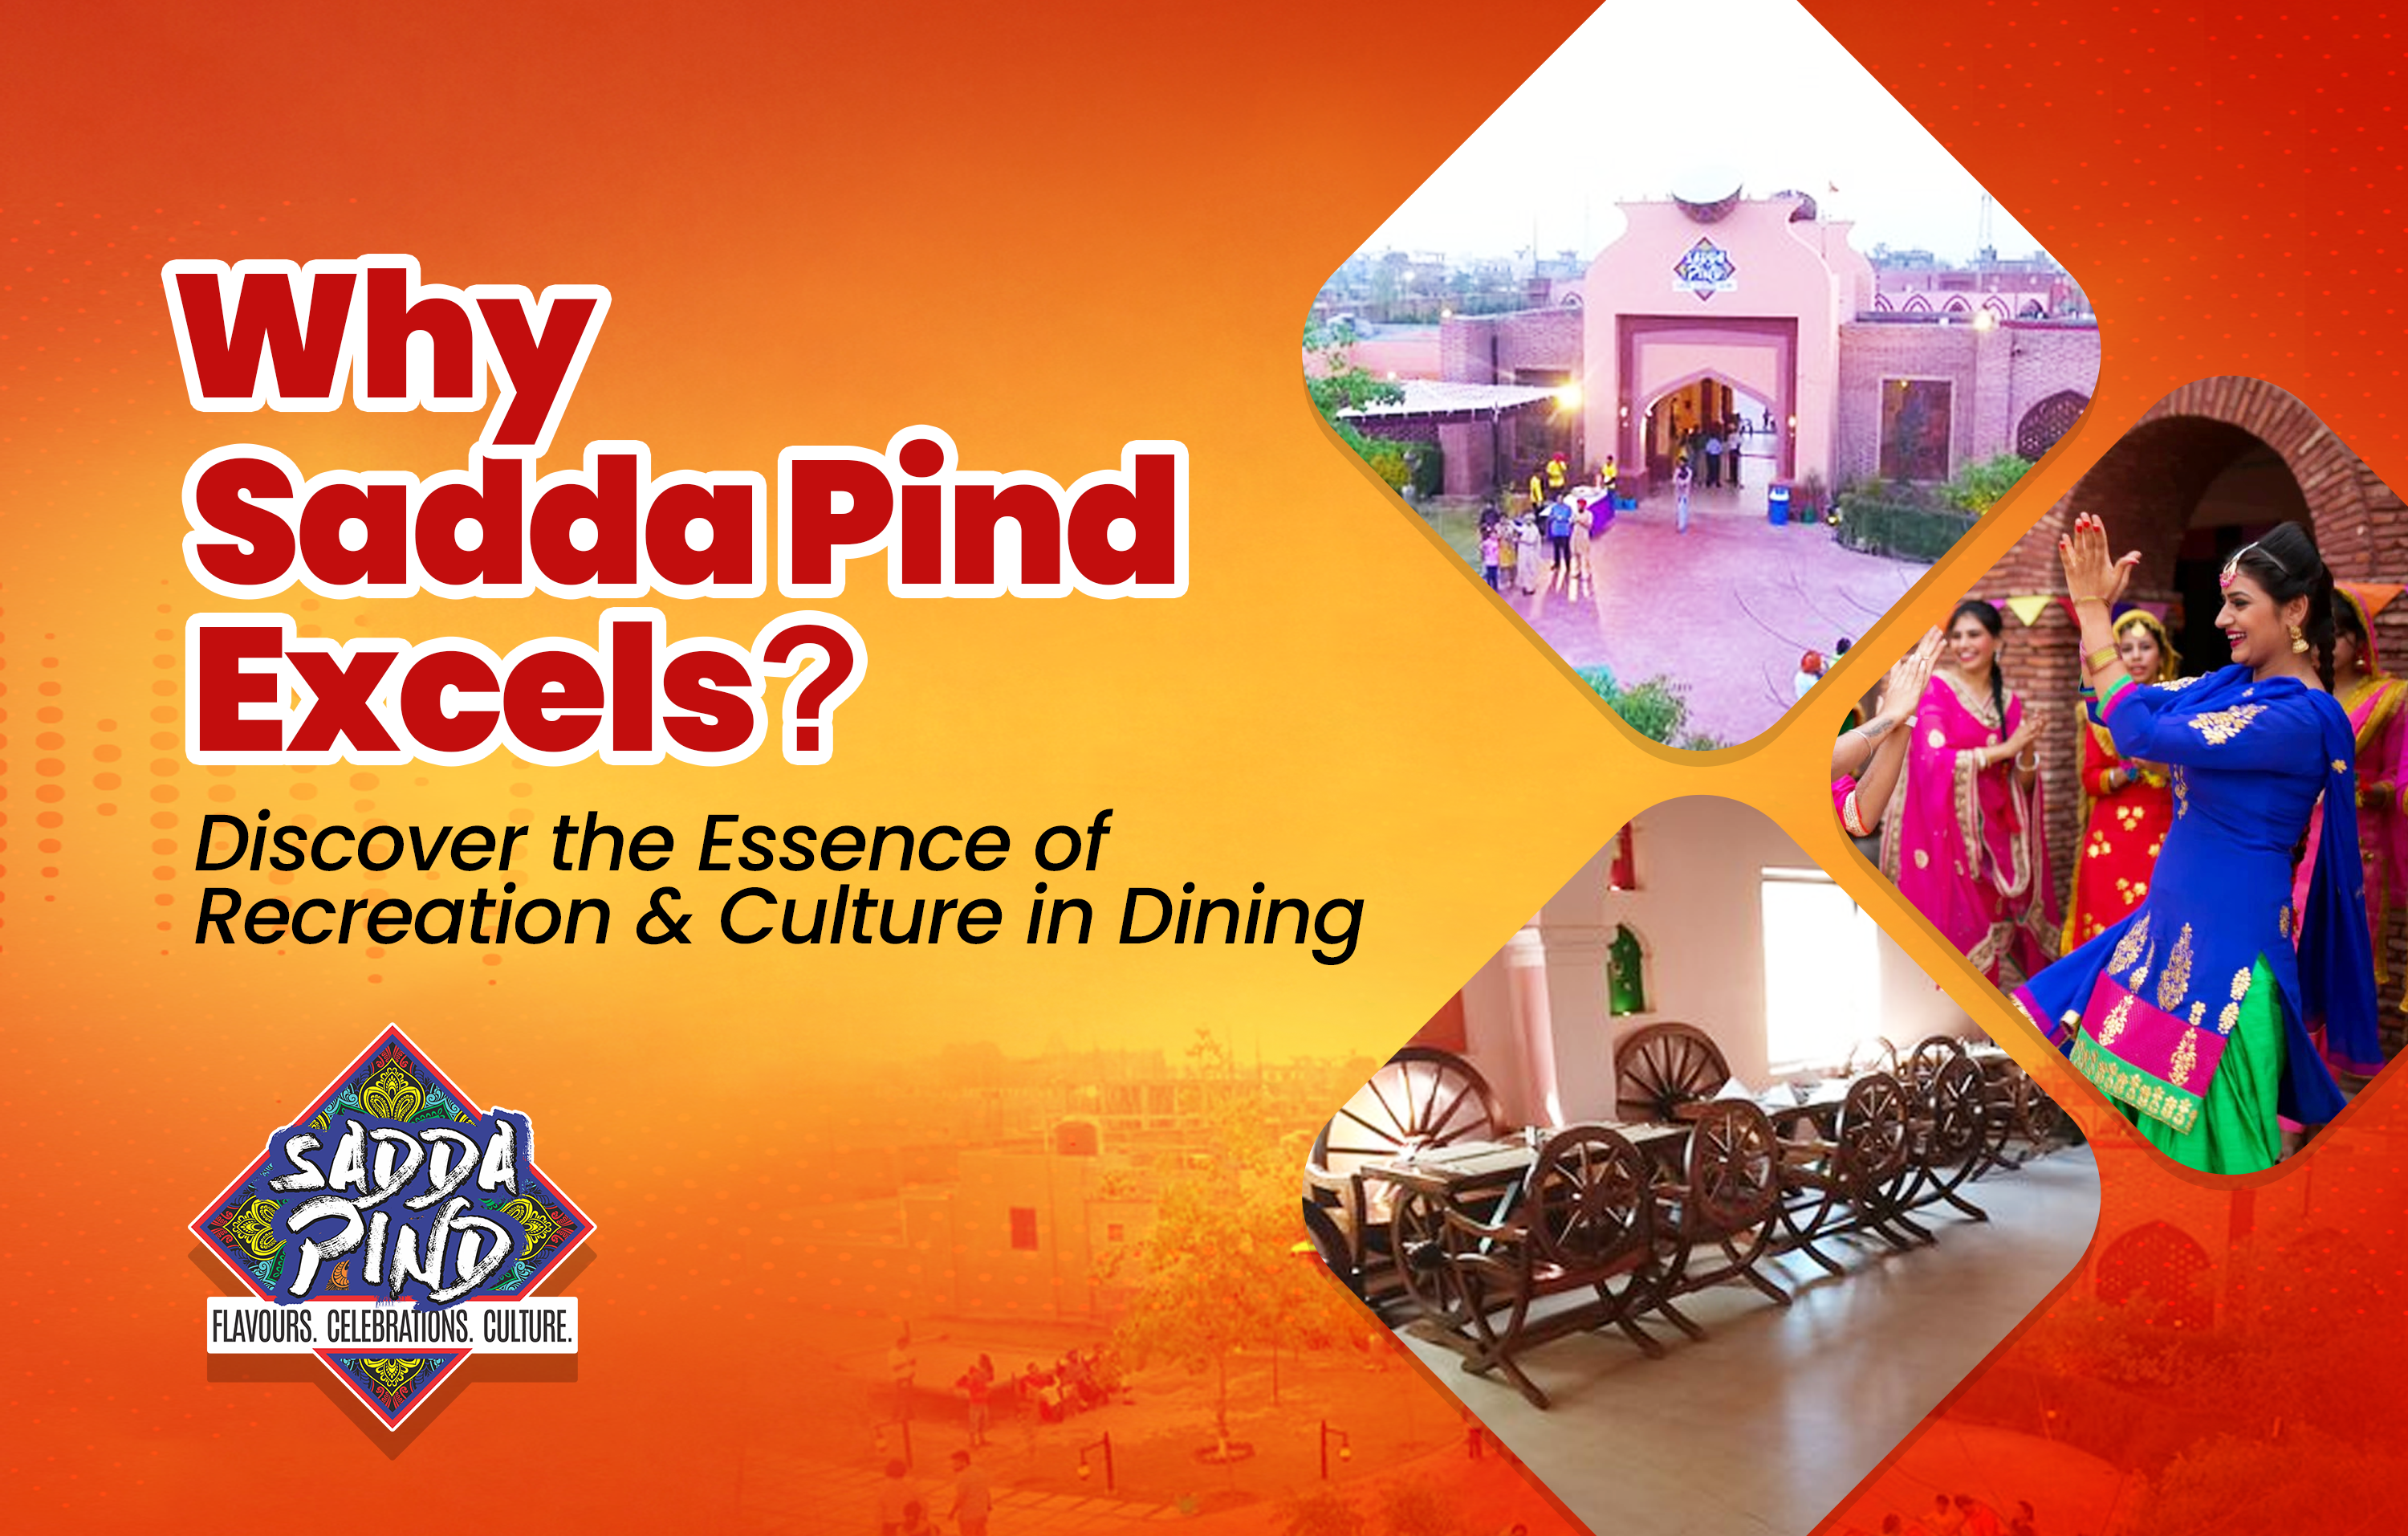 Why Sadda Pind Excels: Unveiling the Significance of Recreational Activities and Cultural Ambiance in This Unique Dining Experience